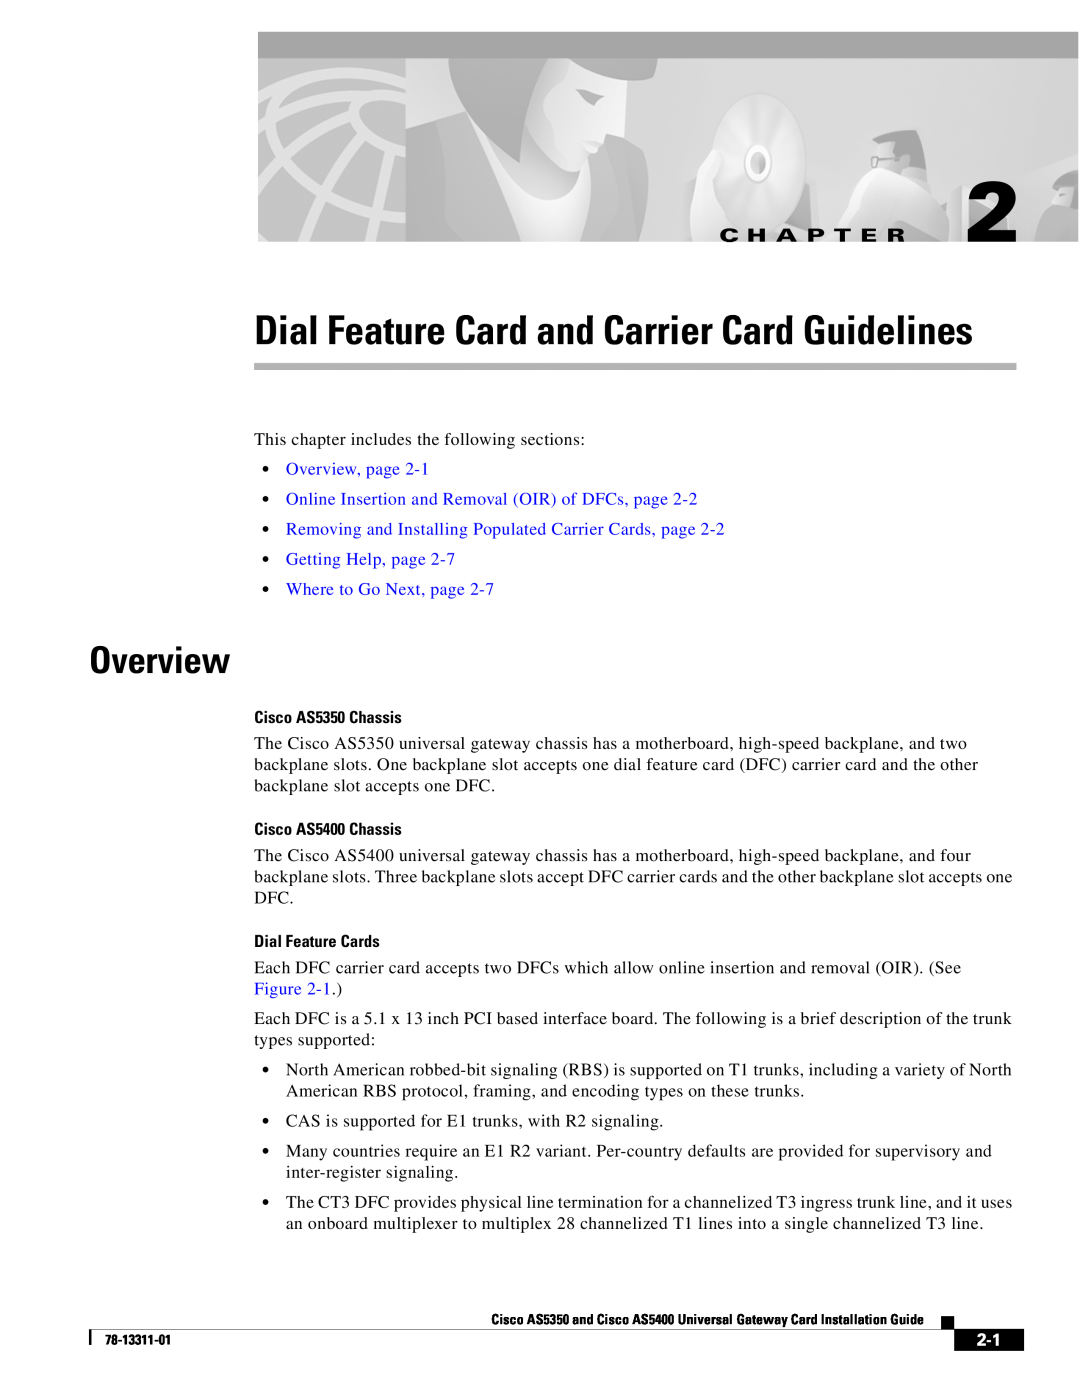 Cisco Systems AS5400 Dial Feature Card and Carrier Card Guidelines, Overview, Getting Help, page Where to Go Next, page 